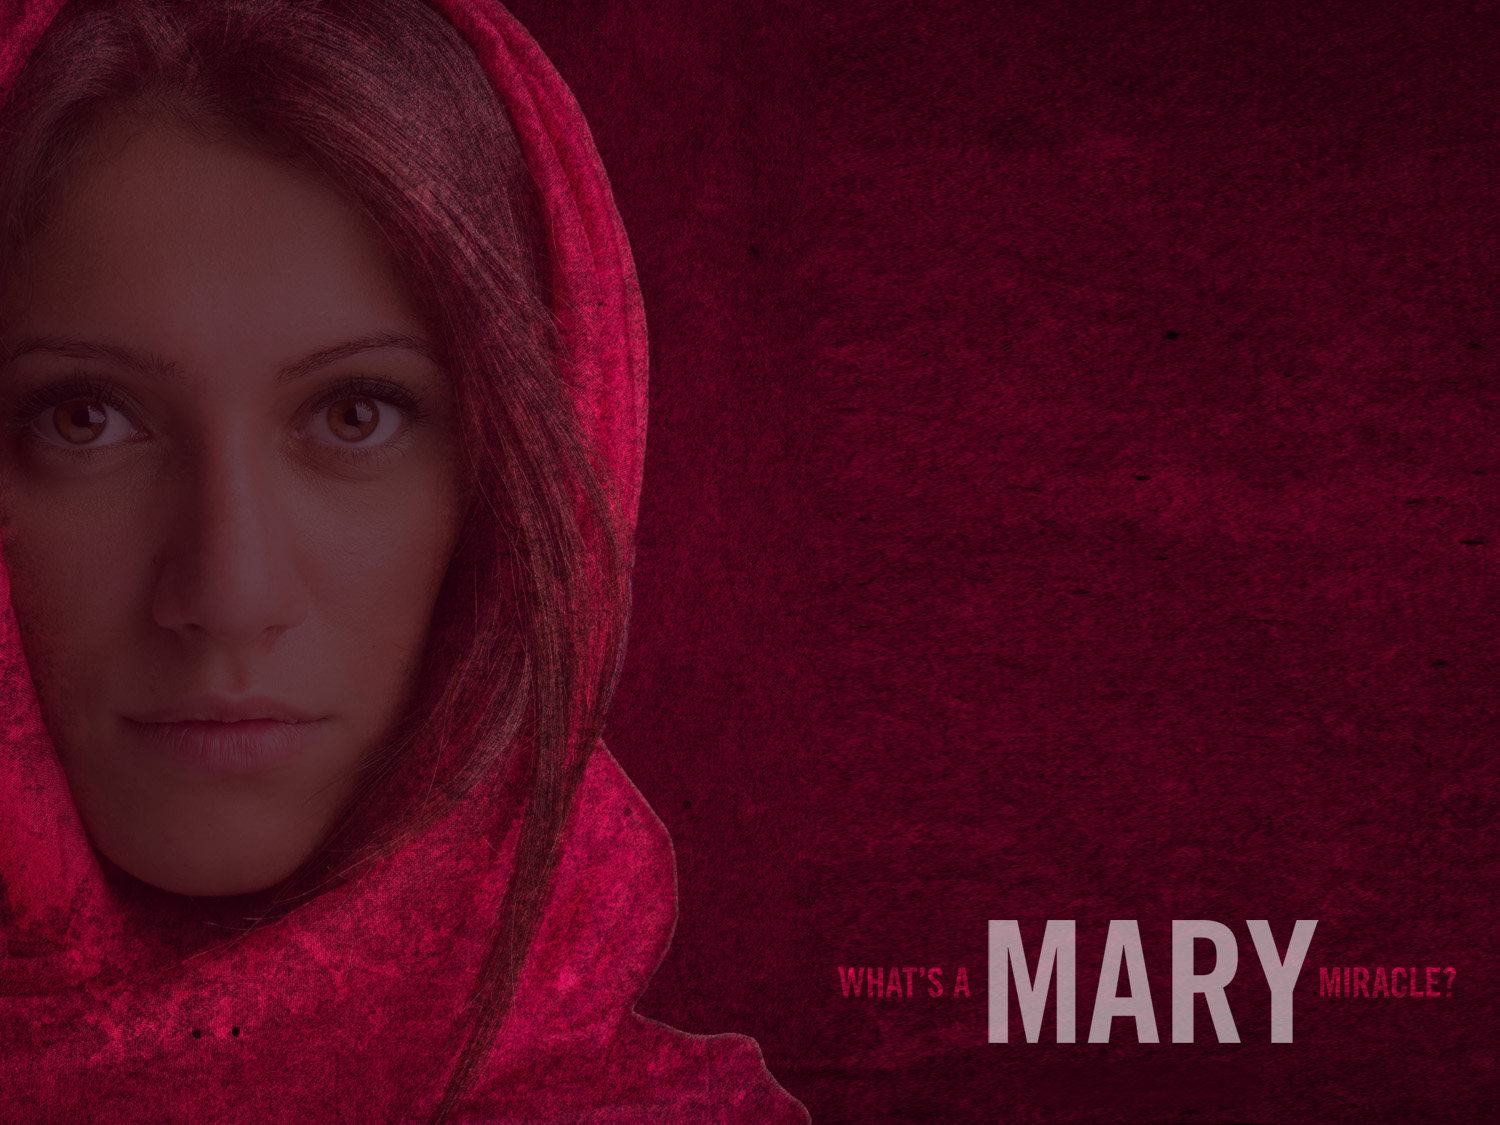 An interview with Mary Magdalene.